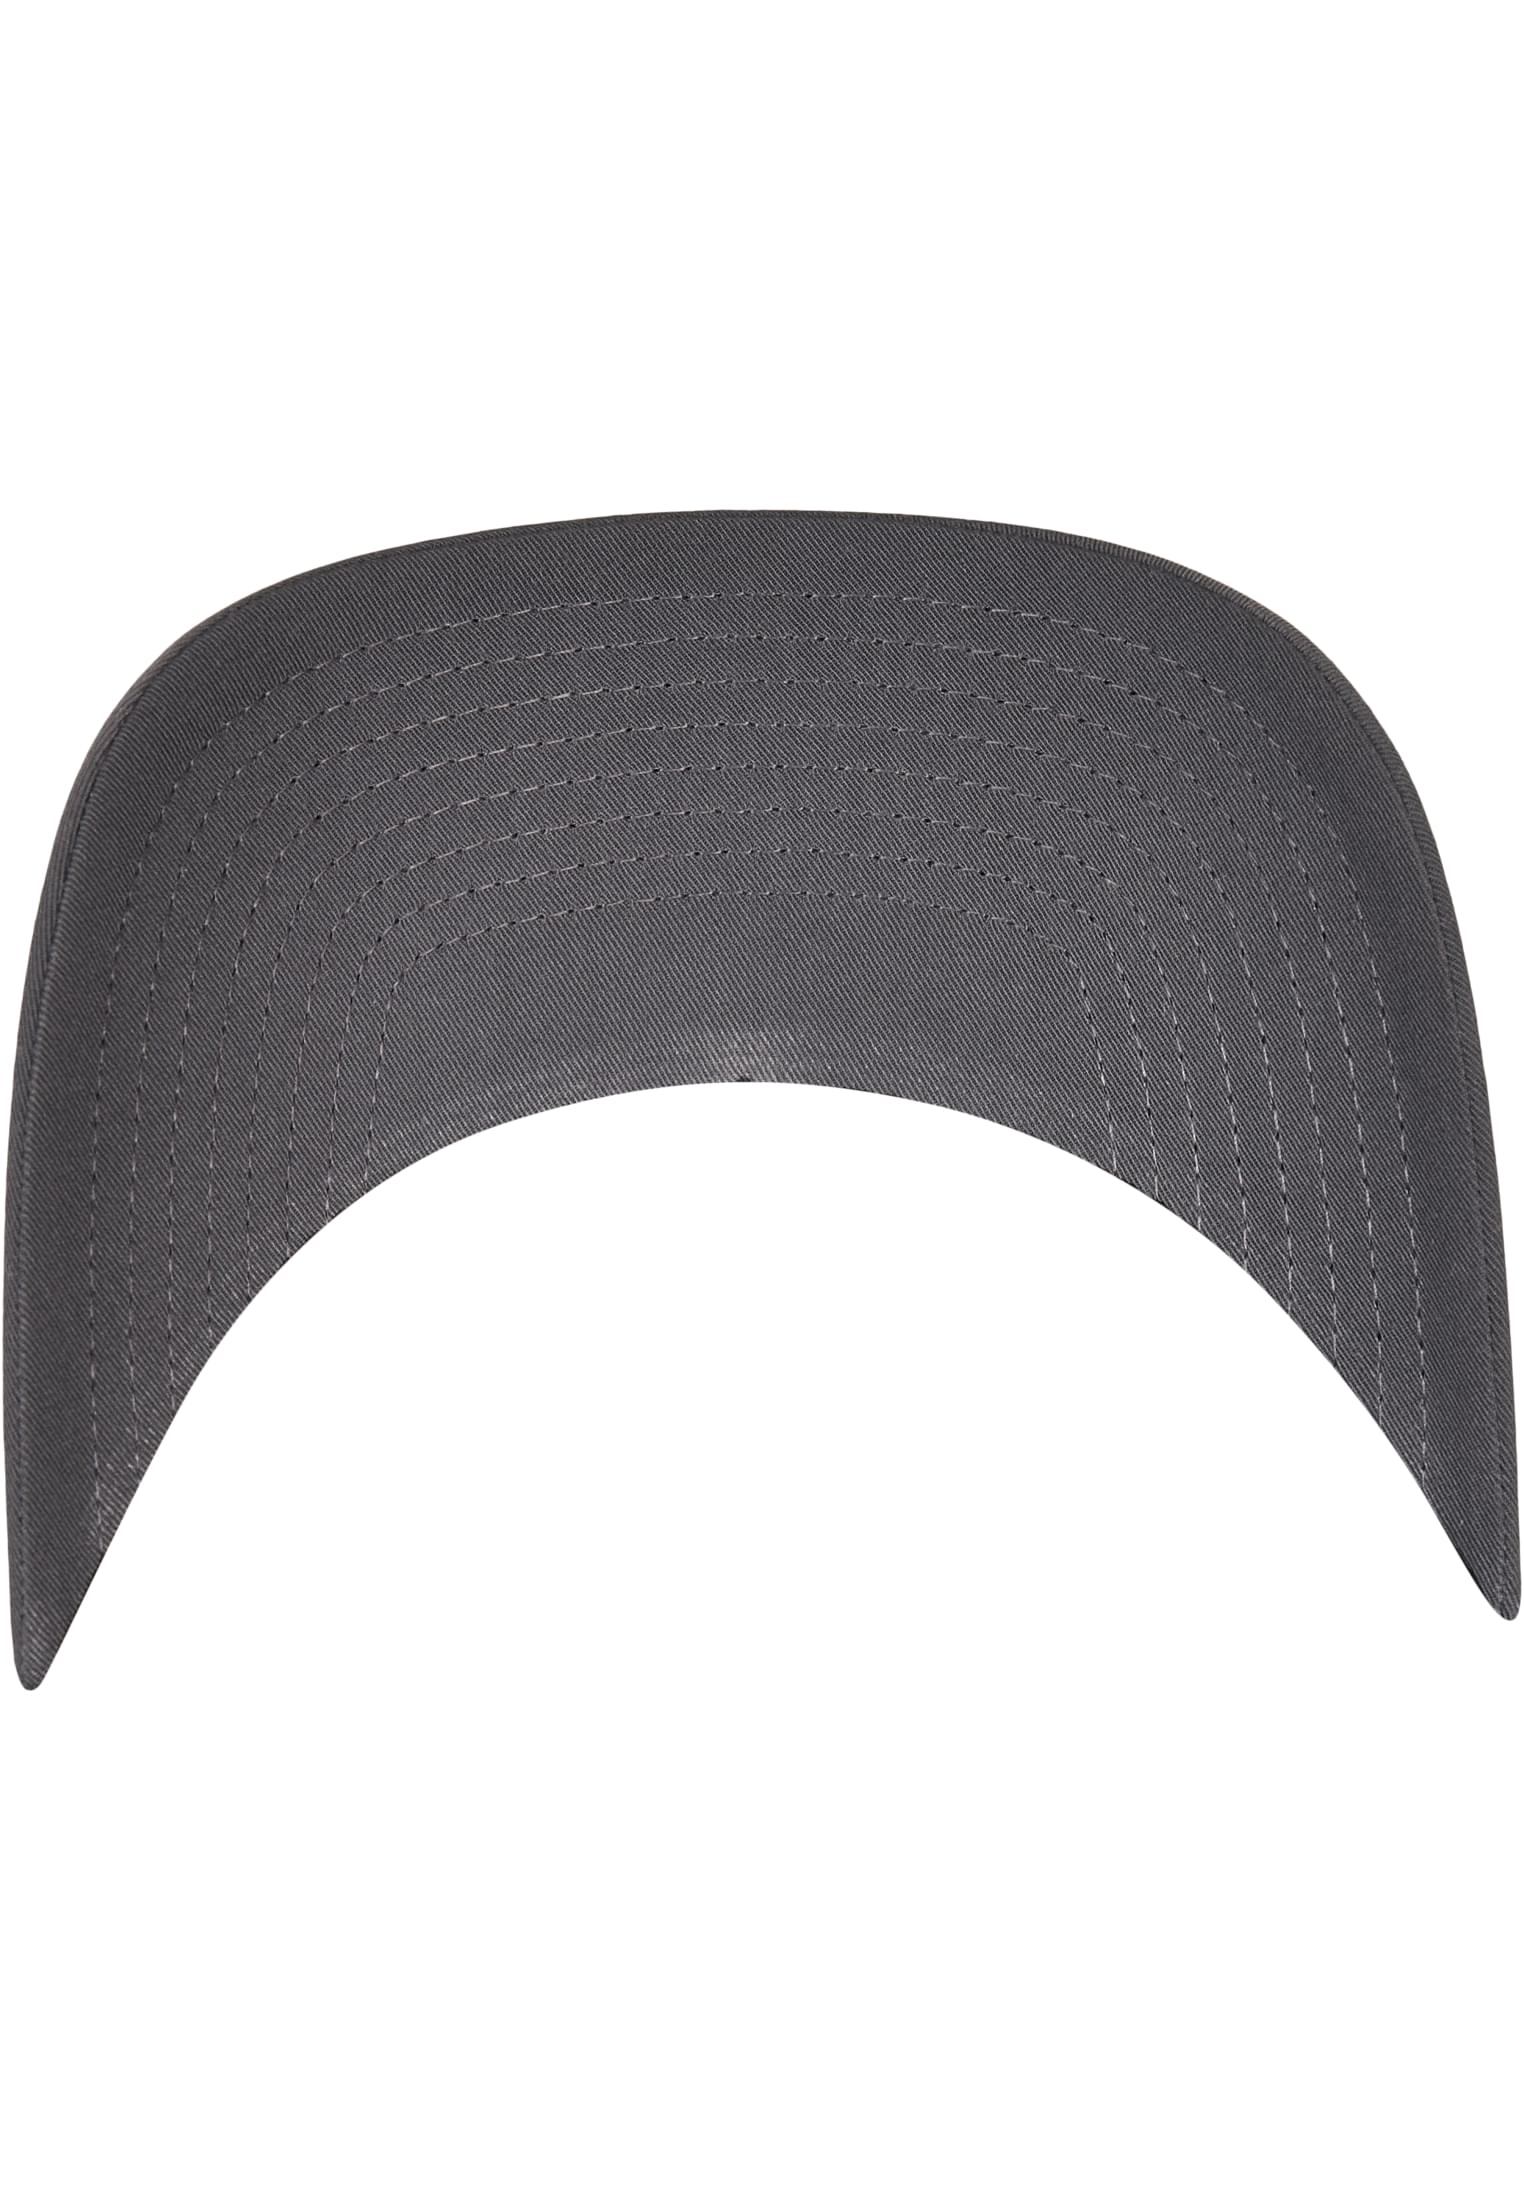 Flexfit Recycled Polyester Cap-6277RP